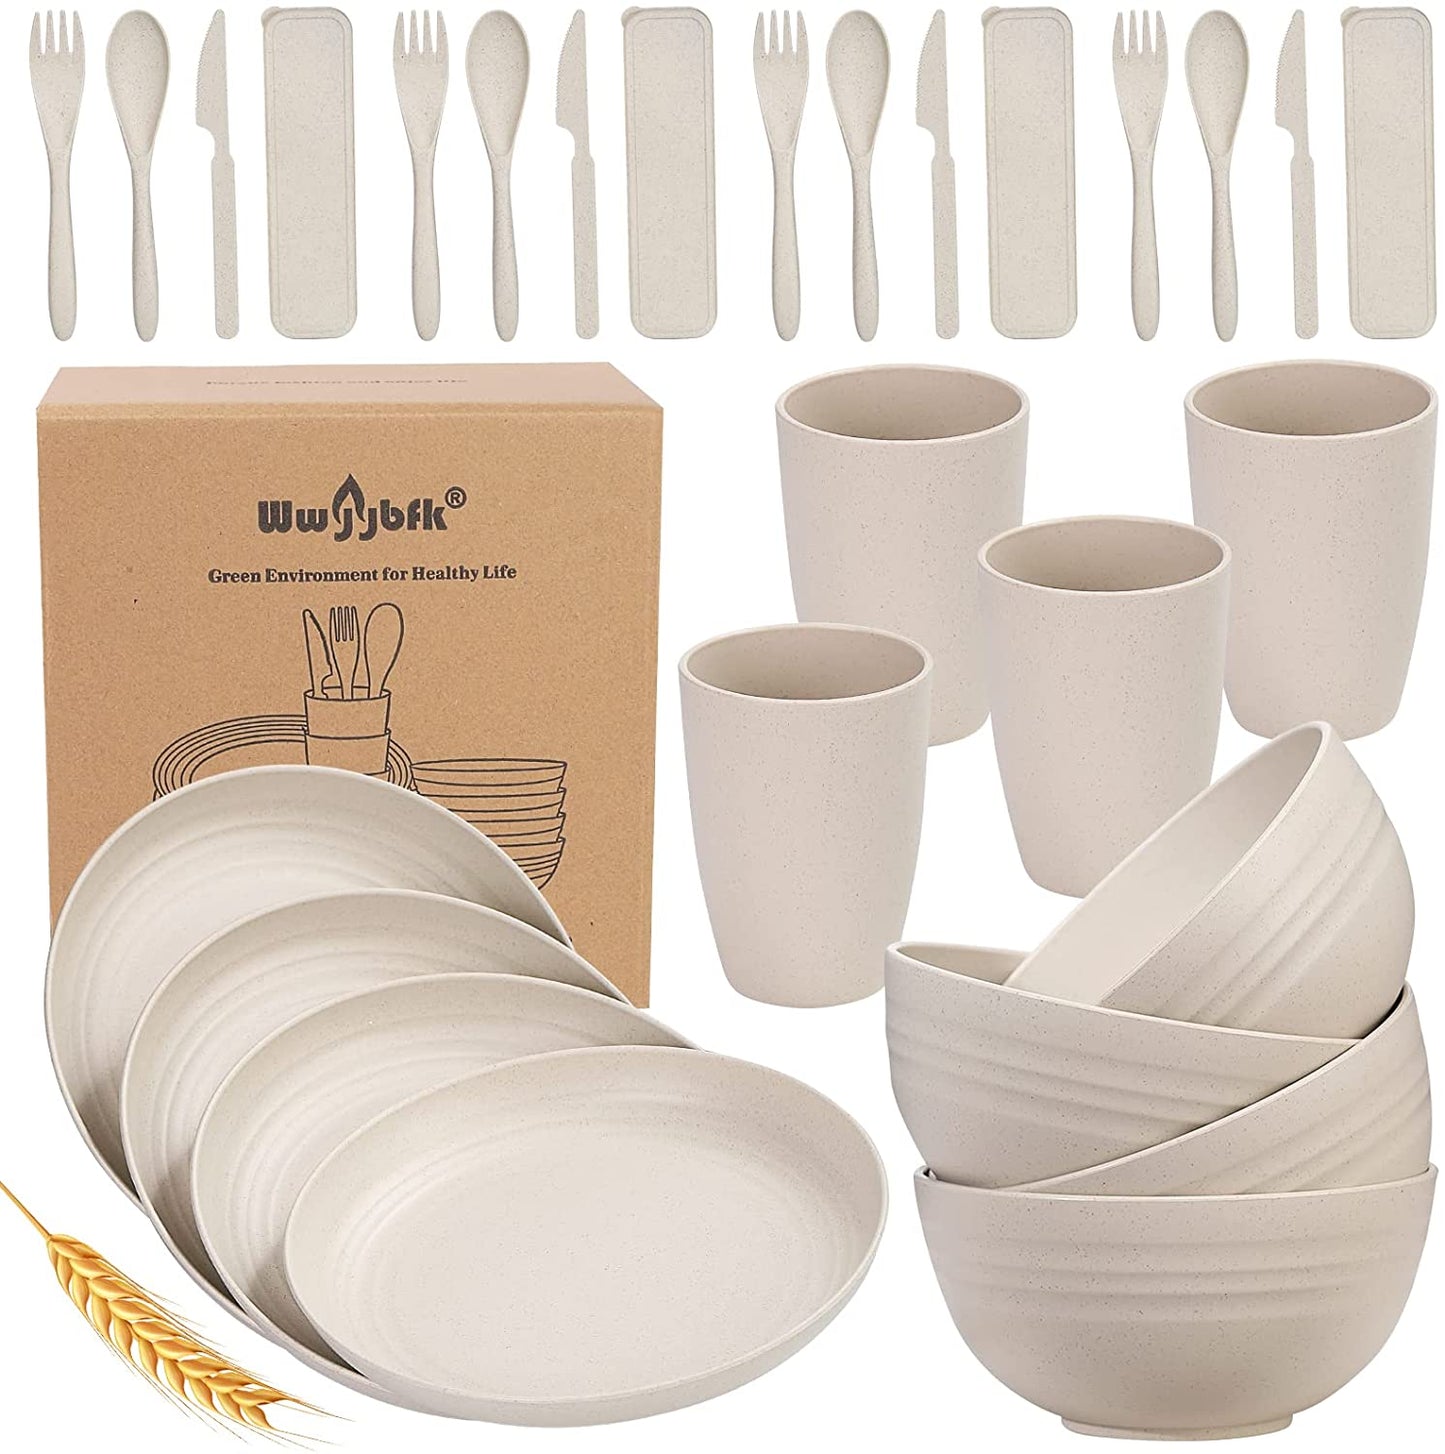 Wheat Straw Dinnerware Sets, 28PCS Unbreakable, Microwave and Dishwasher Safe Tableware Set, Lightweight Plates, Cups, Bowls, Forks (Colorful, Fork)